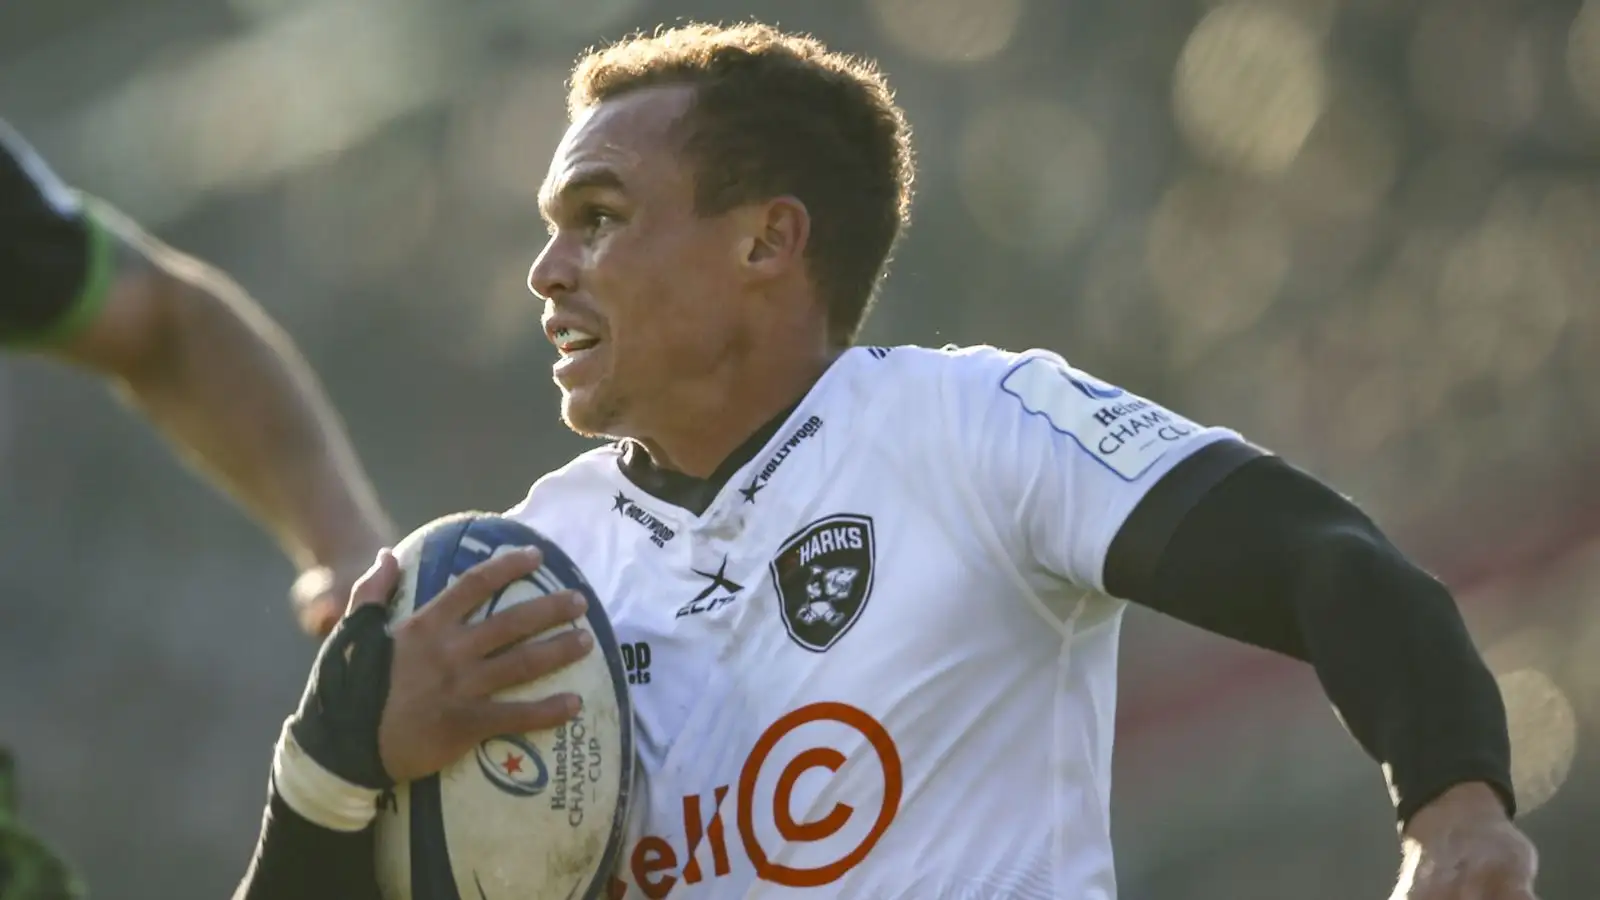 The Sharks ran in seven tries to defeat Munster 50-28 in the first Champions Cup playoff match in South Africa, with Bongi Mbonambi scoring twice.